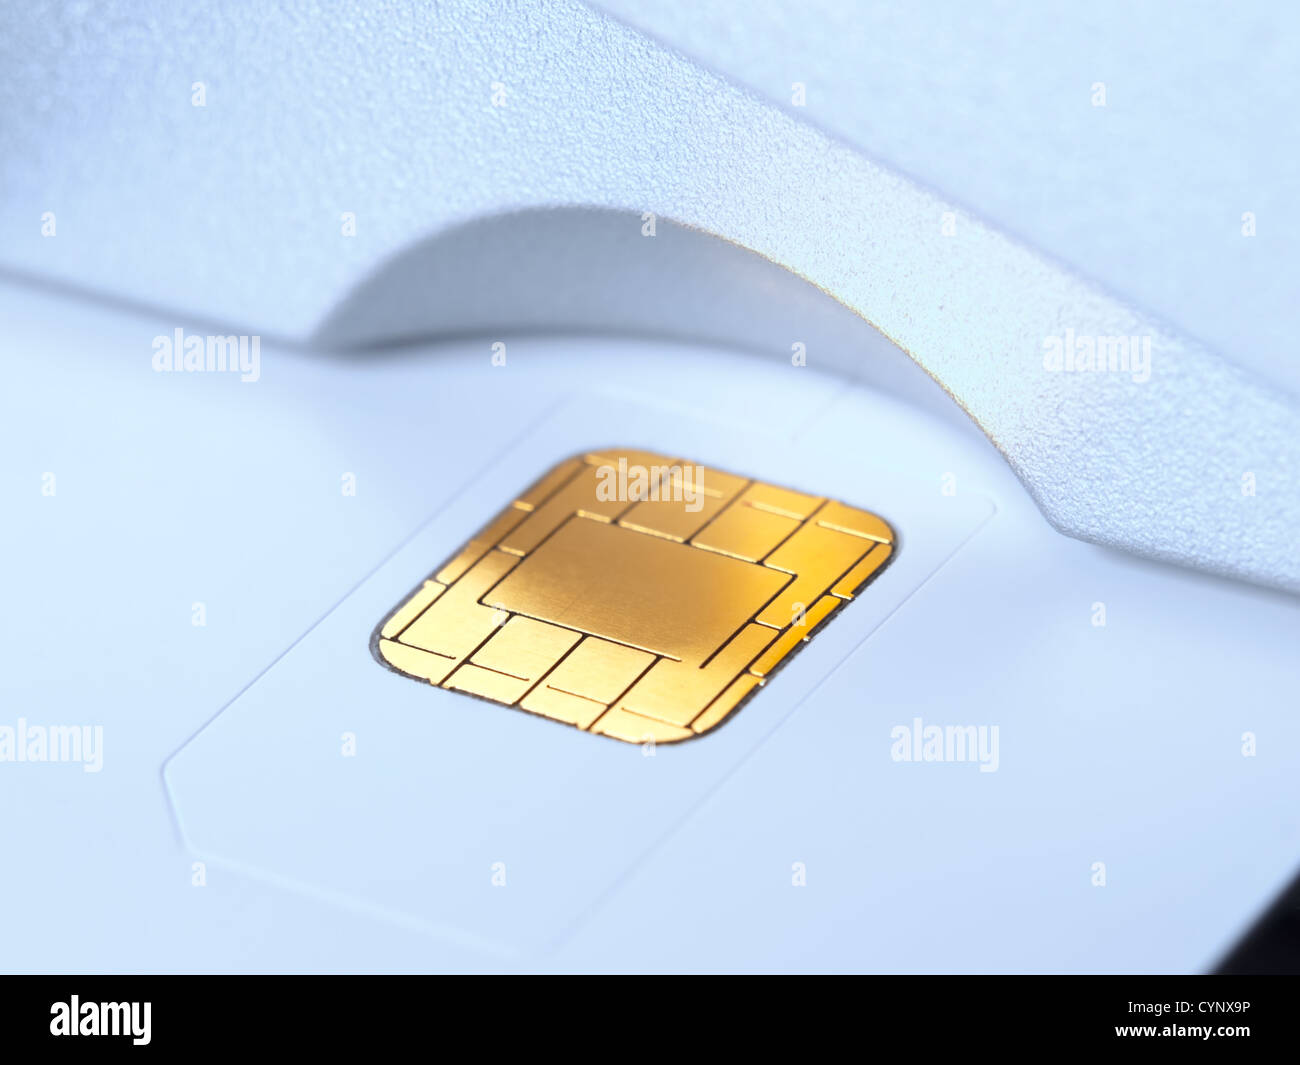 Chip card in the card reader slot, for banking,security,money ,decoding themes Stock Photo